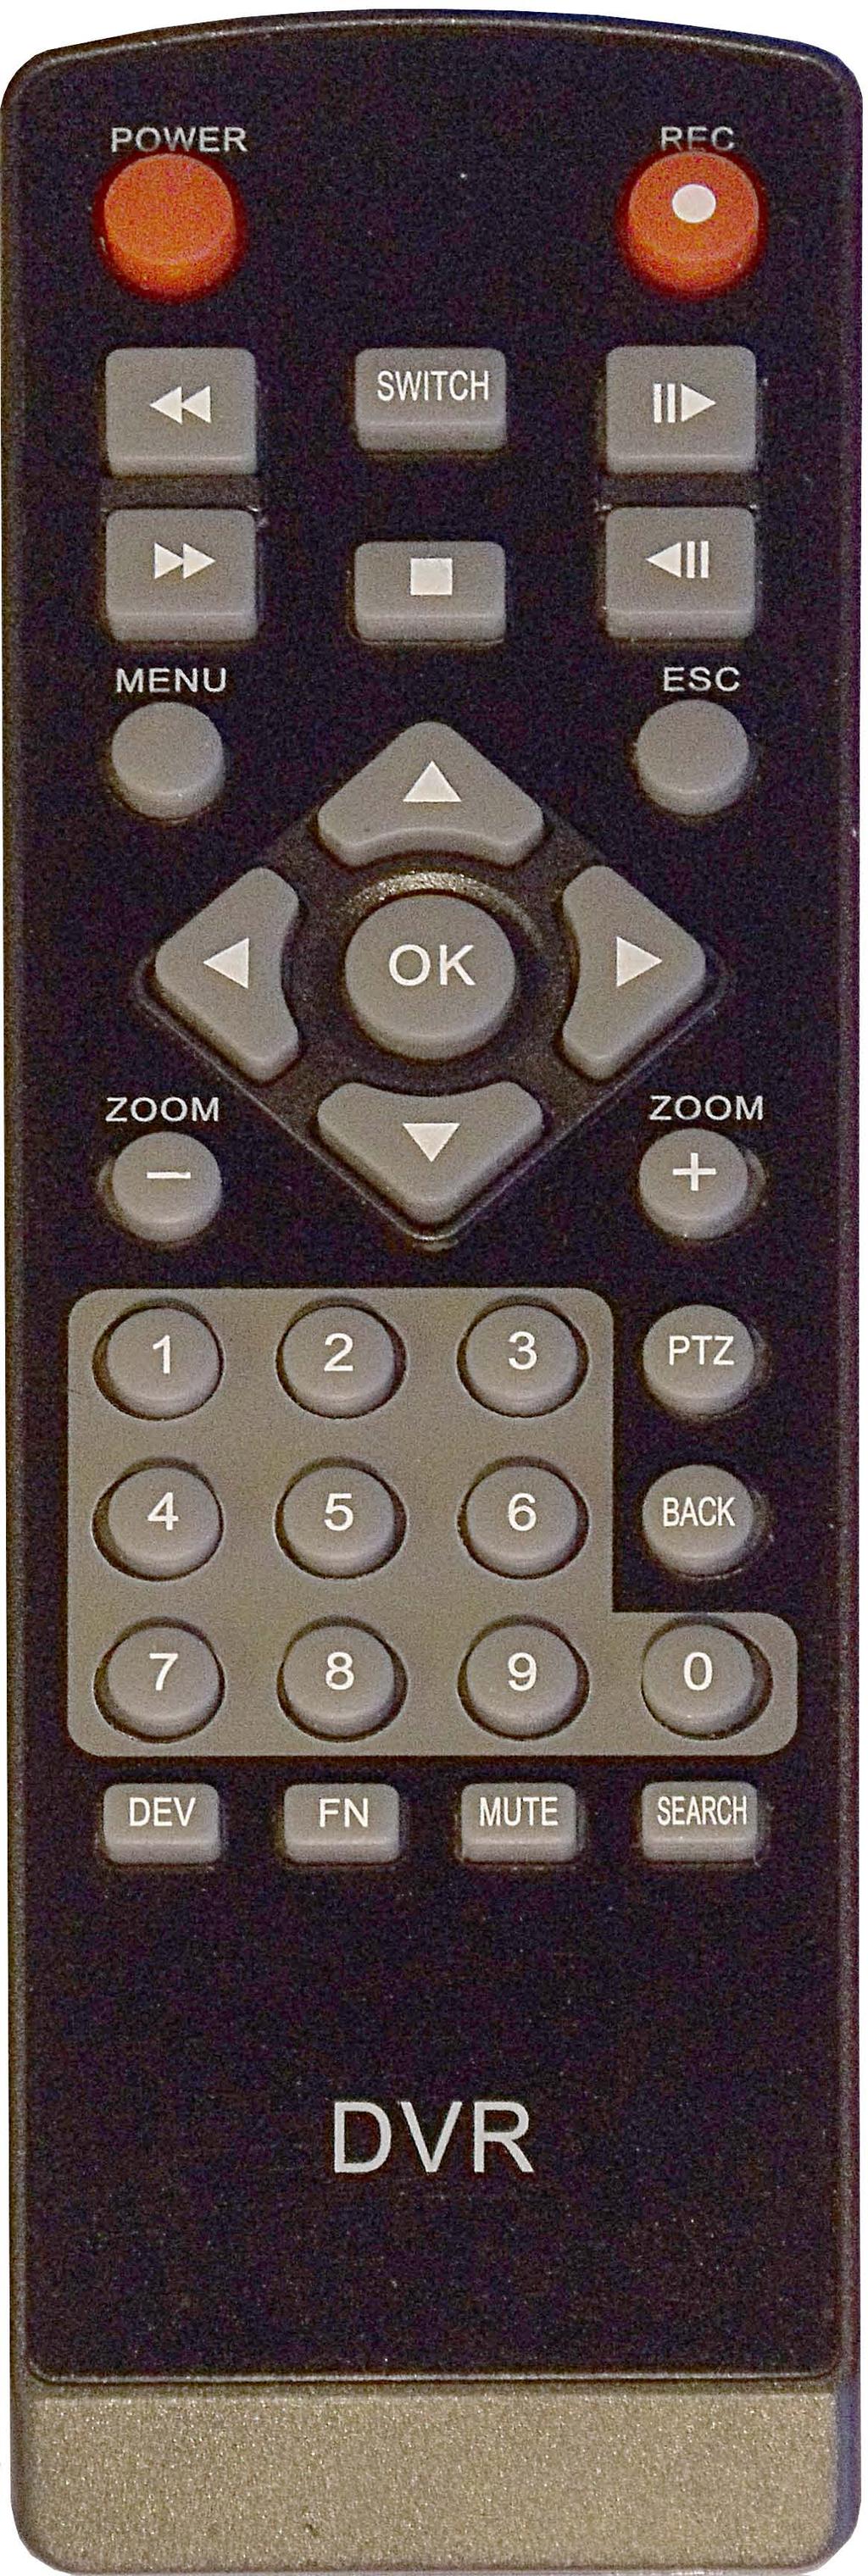 2. INFRARED REMOTE Keypad Key Description POWER Power DVR On/Off Record button; Display the Record Mode window SWITCH Switch between 1 or 4-window monitor display Slow video playback Fast video